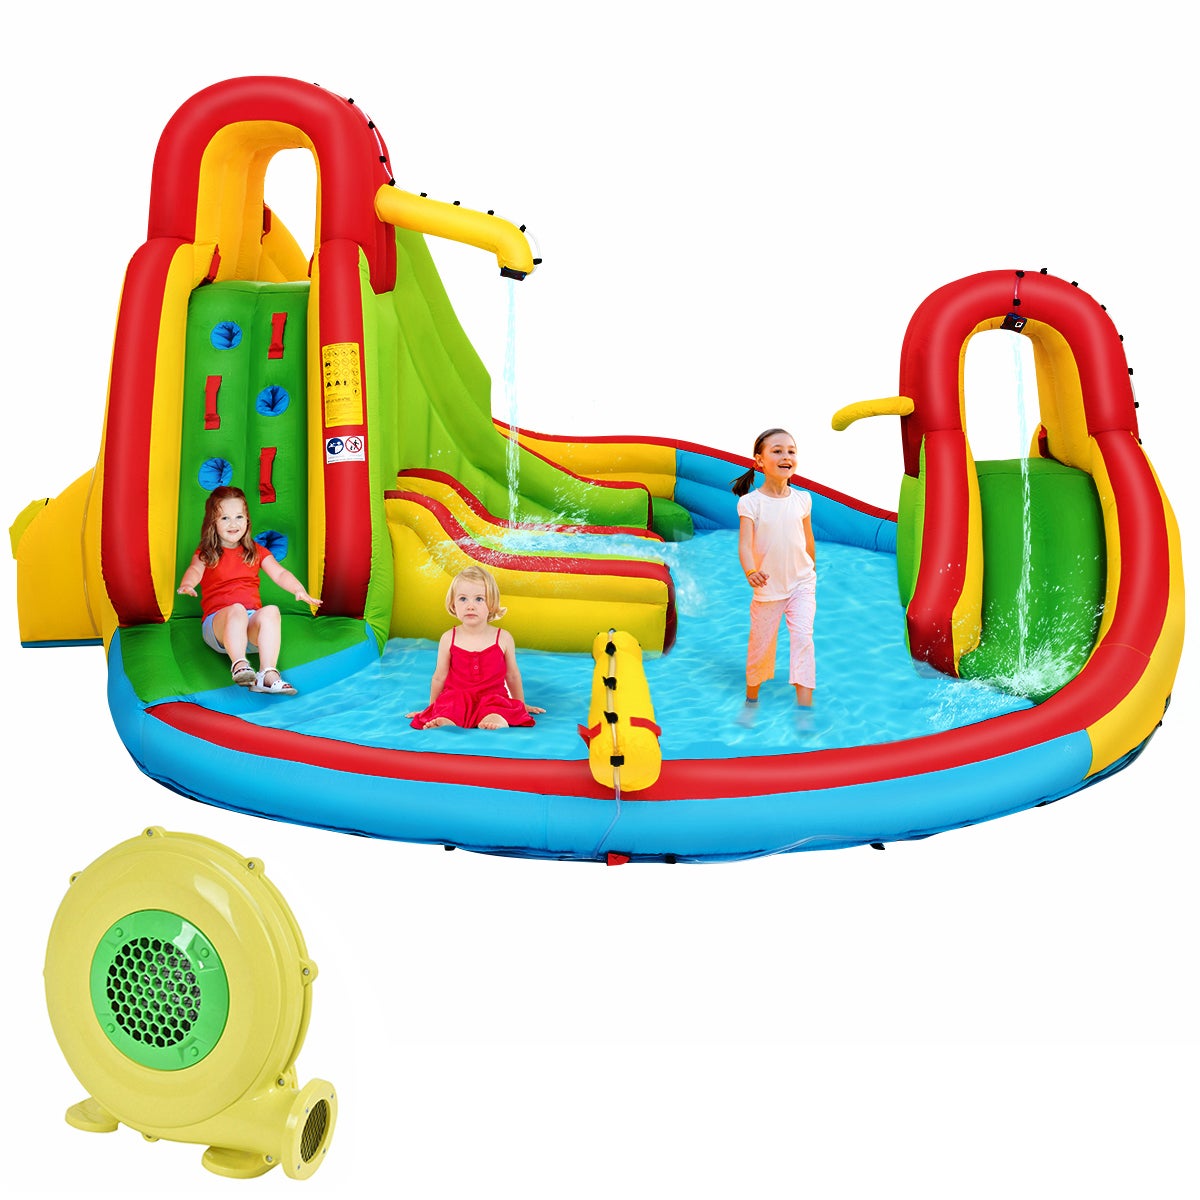 Costway 7-IN-1 Inflatable Water Slide, w/Air Blower & Double Slides, Jumping Castle, Bouncer House, Water Park Splash Pool Toy Swimming Outdoor